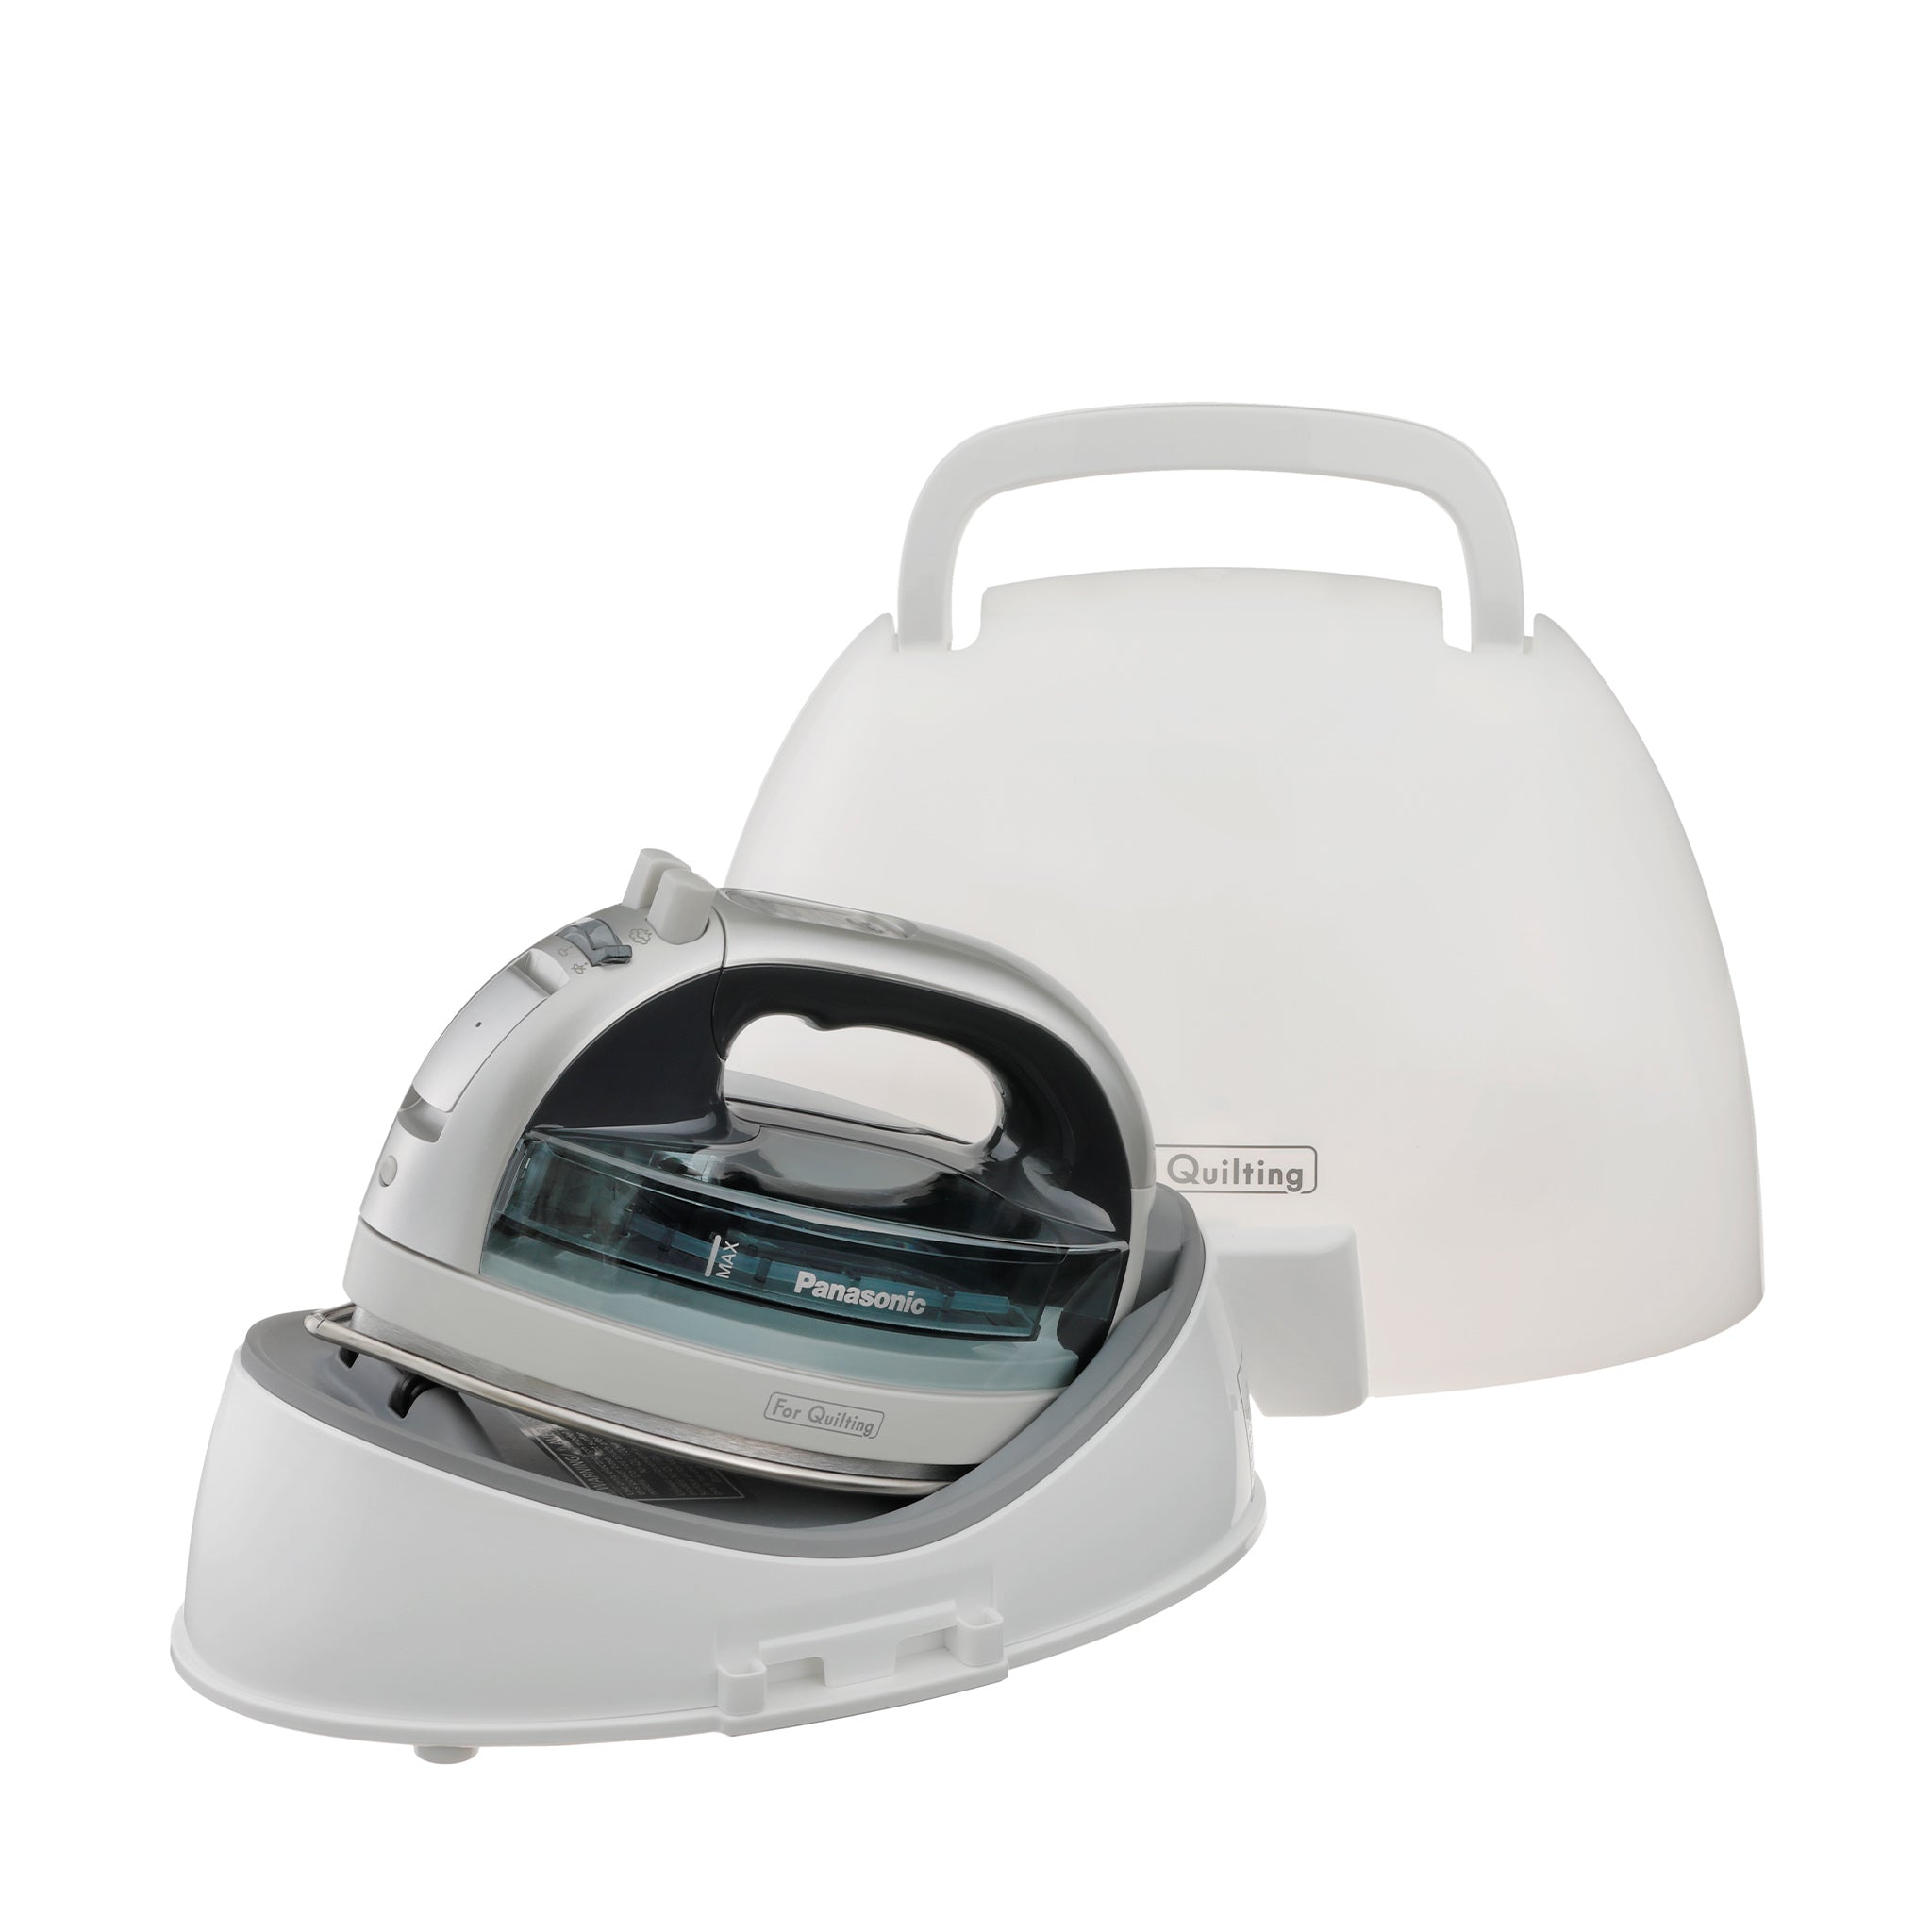 Cordless Steam/Dry Iron 1500W Precise Stainless Plate